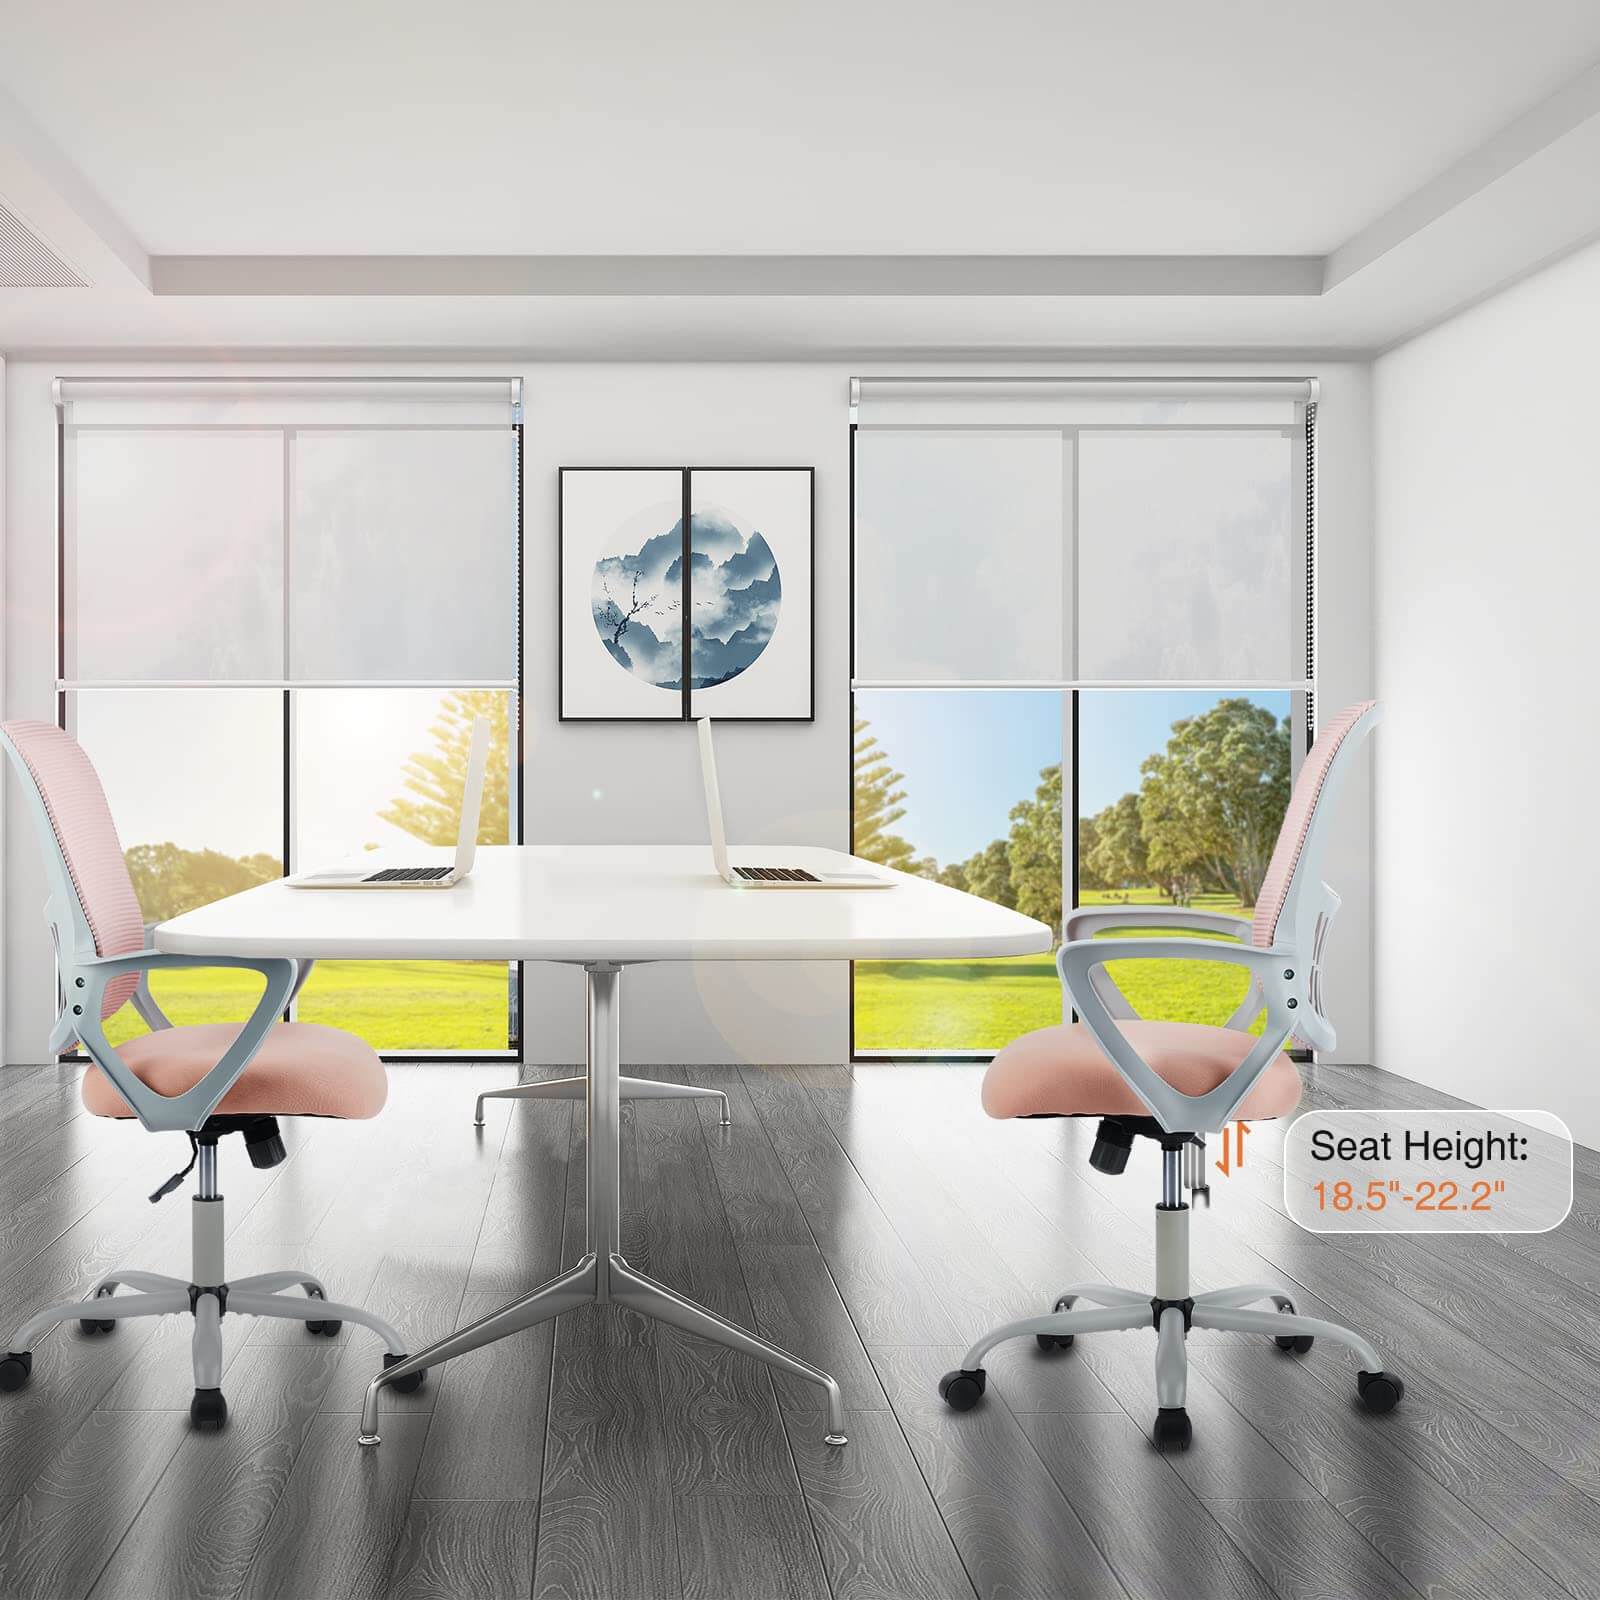 office-chair-ergonomic#Quantity_2 Chair#Color_Pink